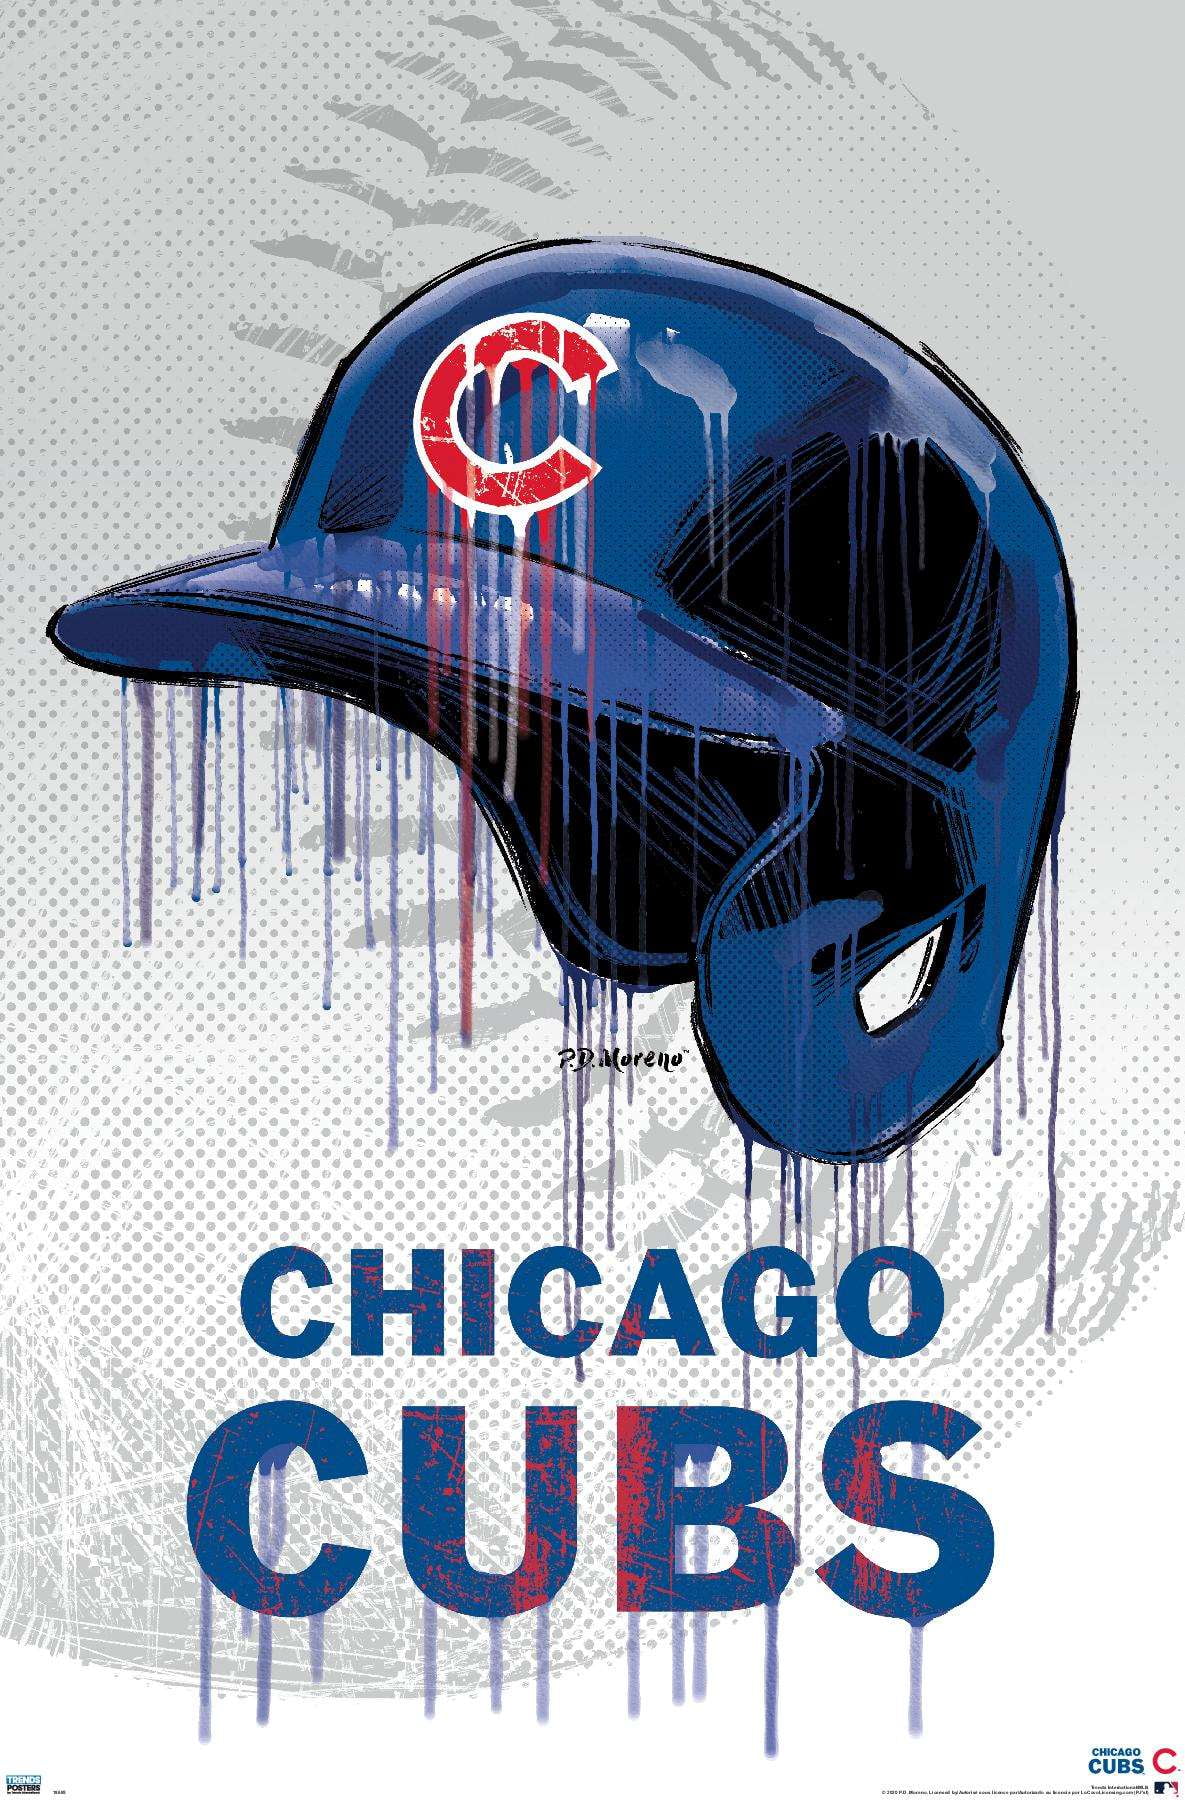 cubs mlb store